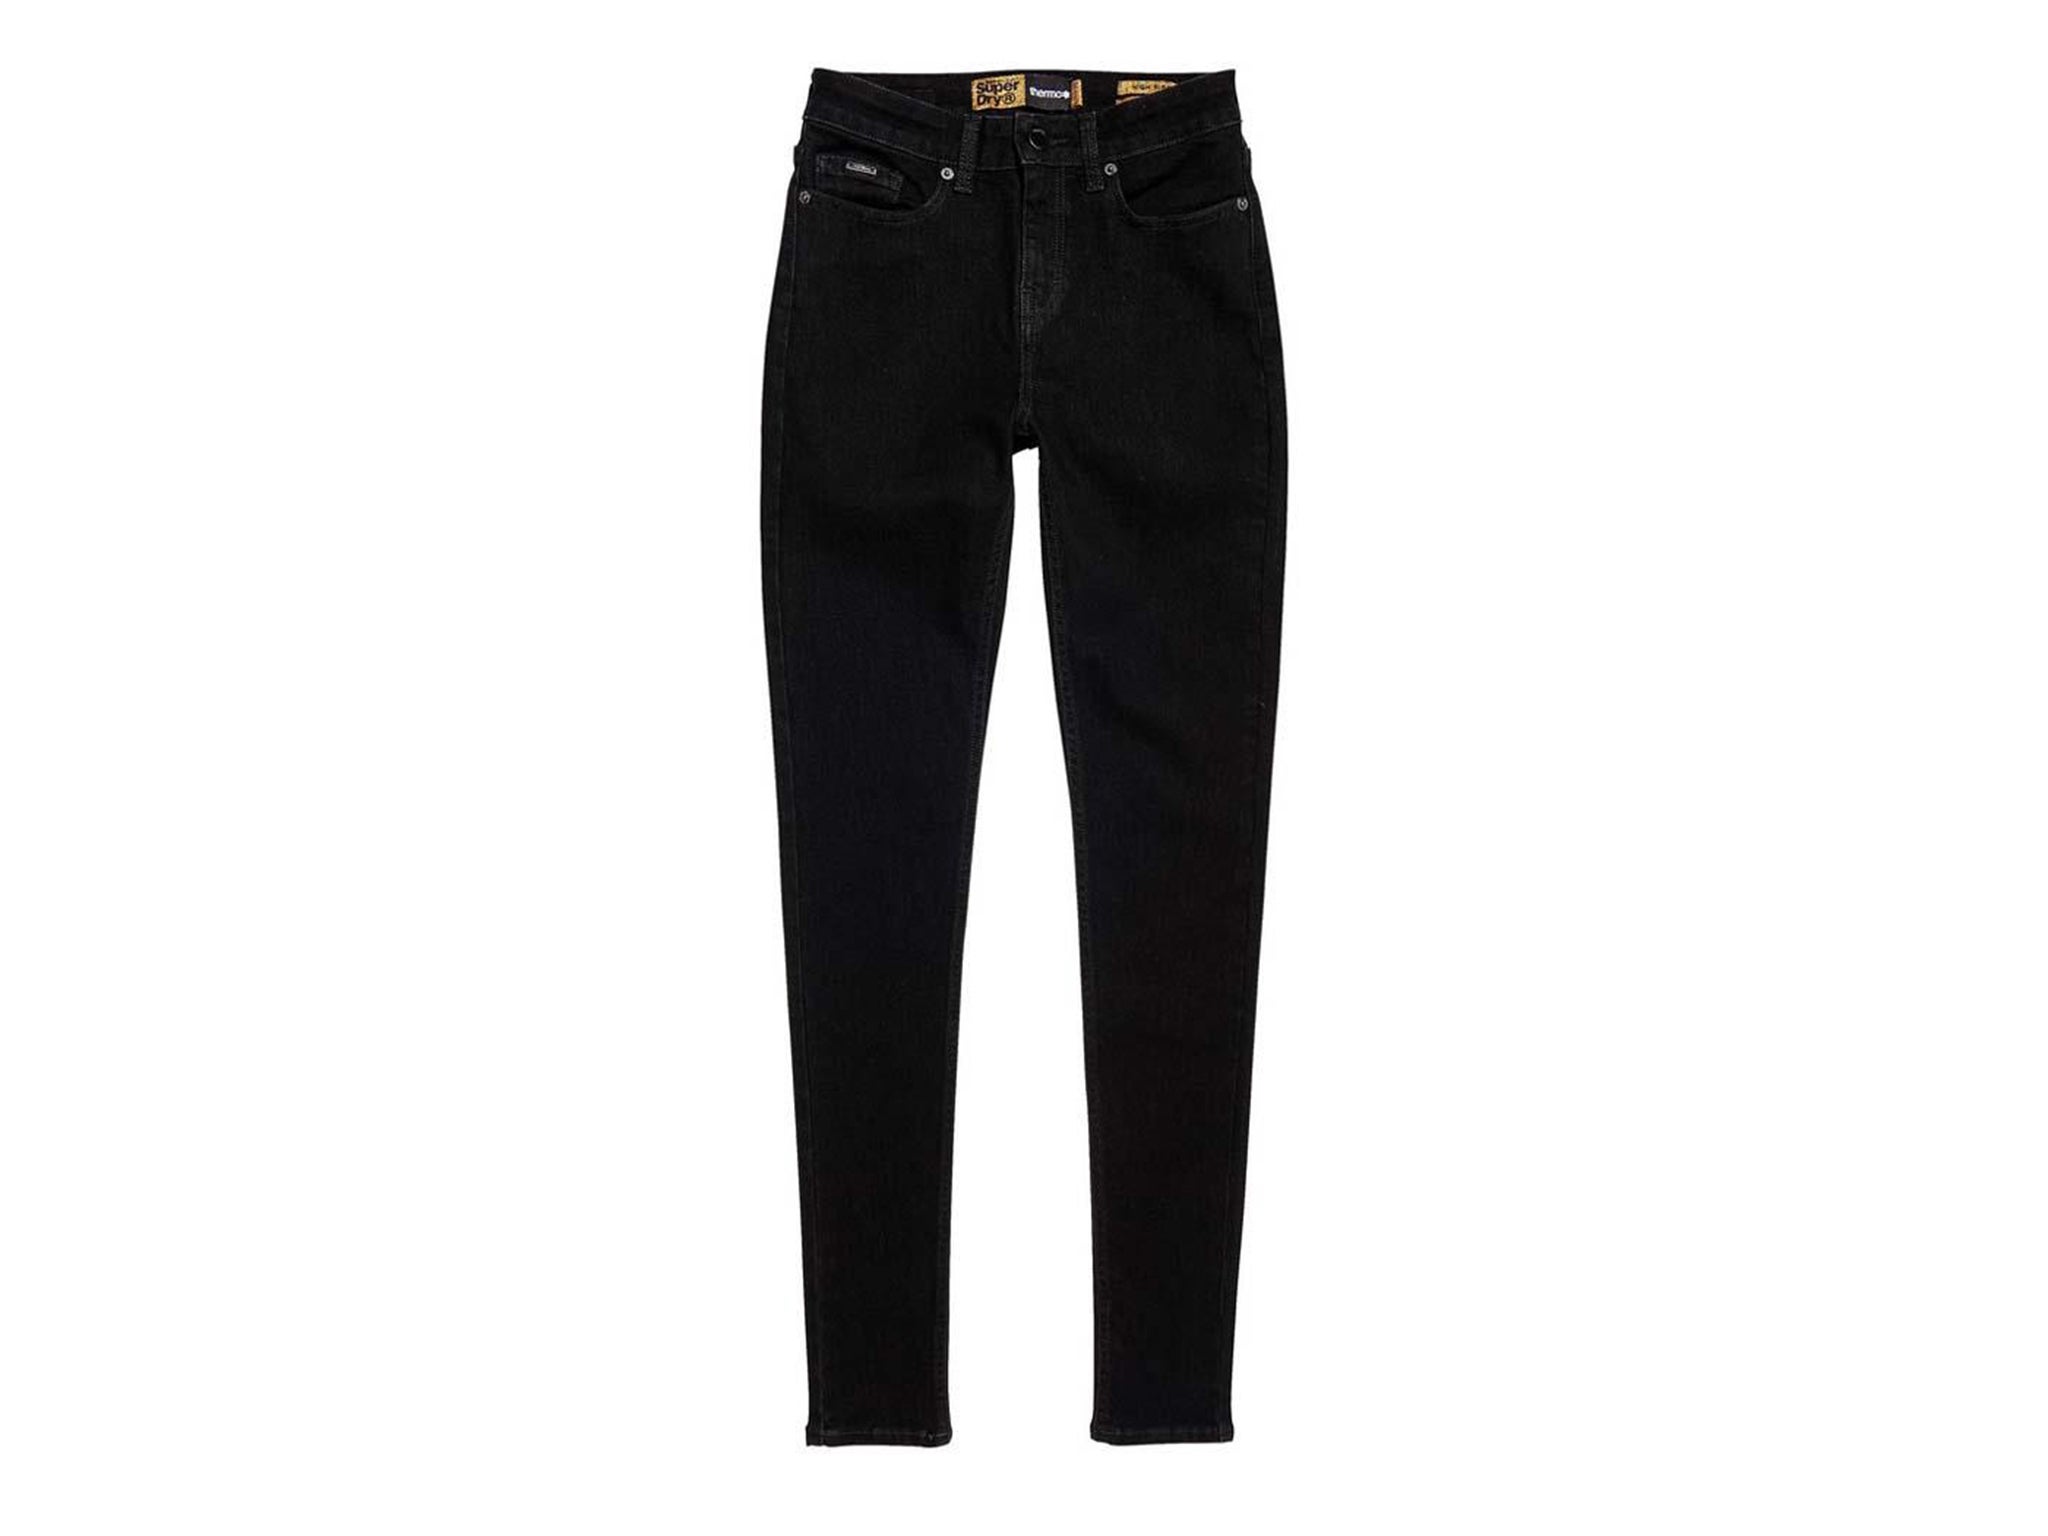 superdry-superthermo-skinny-high-rise-indybest-fleece-lined-jeans.jpg